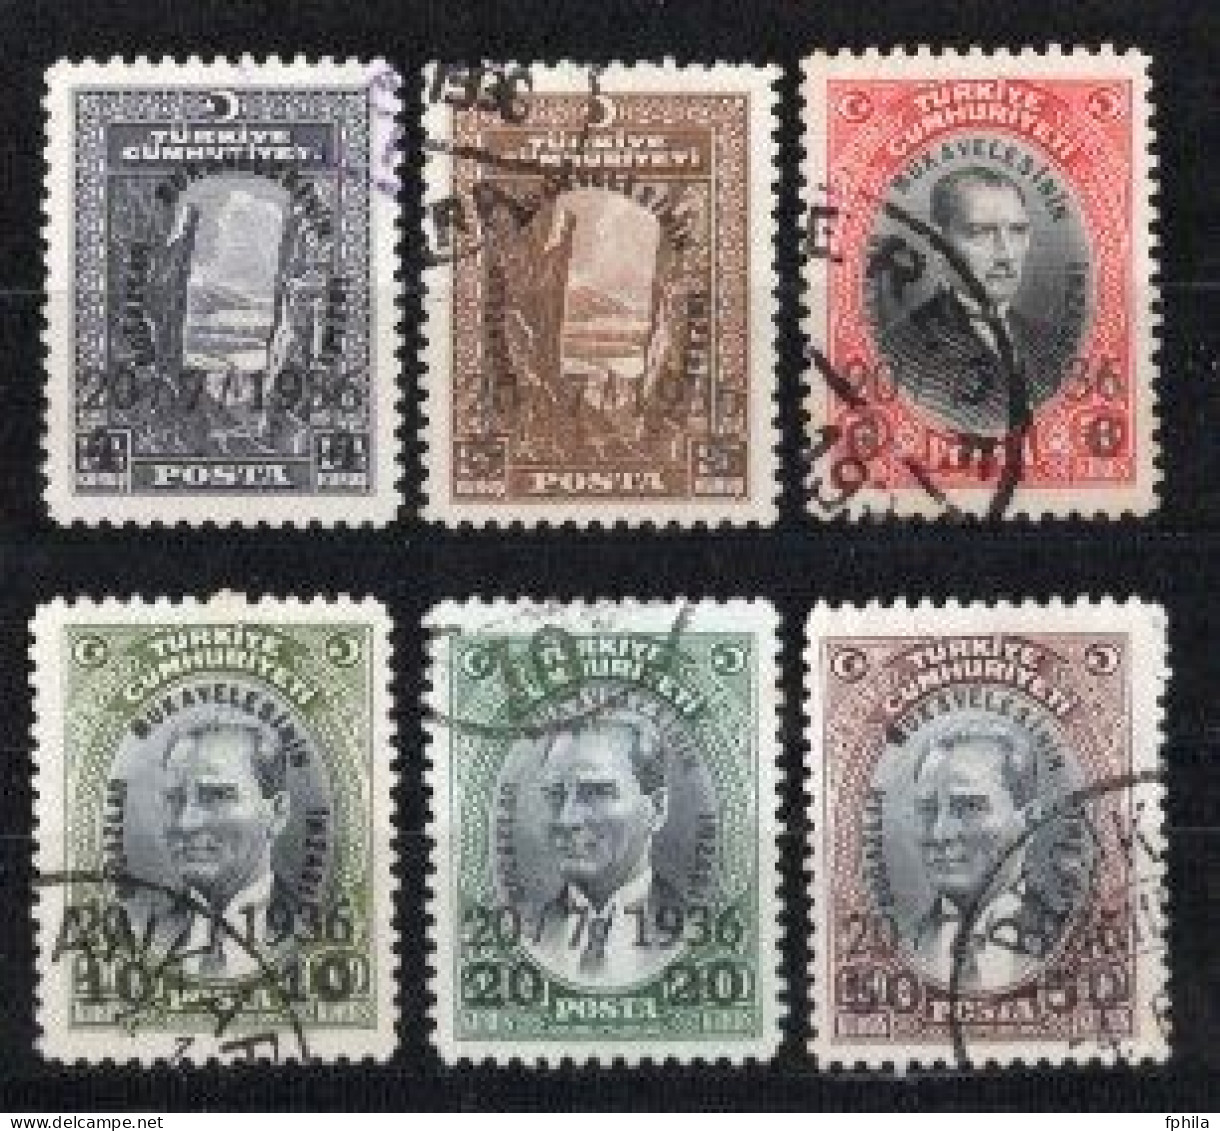 1936 TURKEY SURCHARGED COMMEMORATIVE STAMPS FOR THE SIGNATURE OF THE STRAITS SETTLEMENT USED - Usati